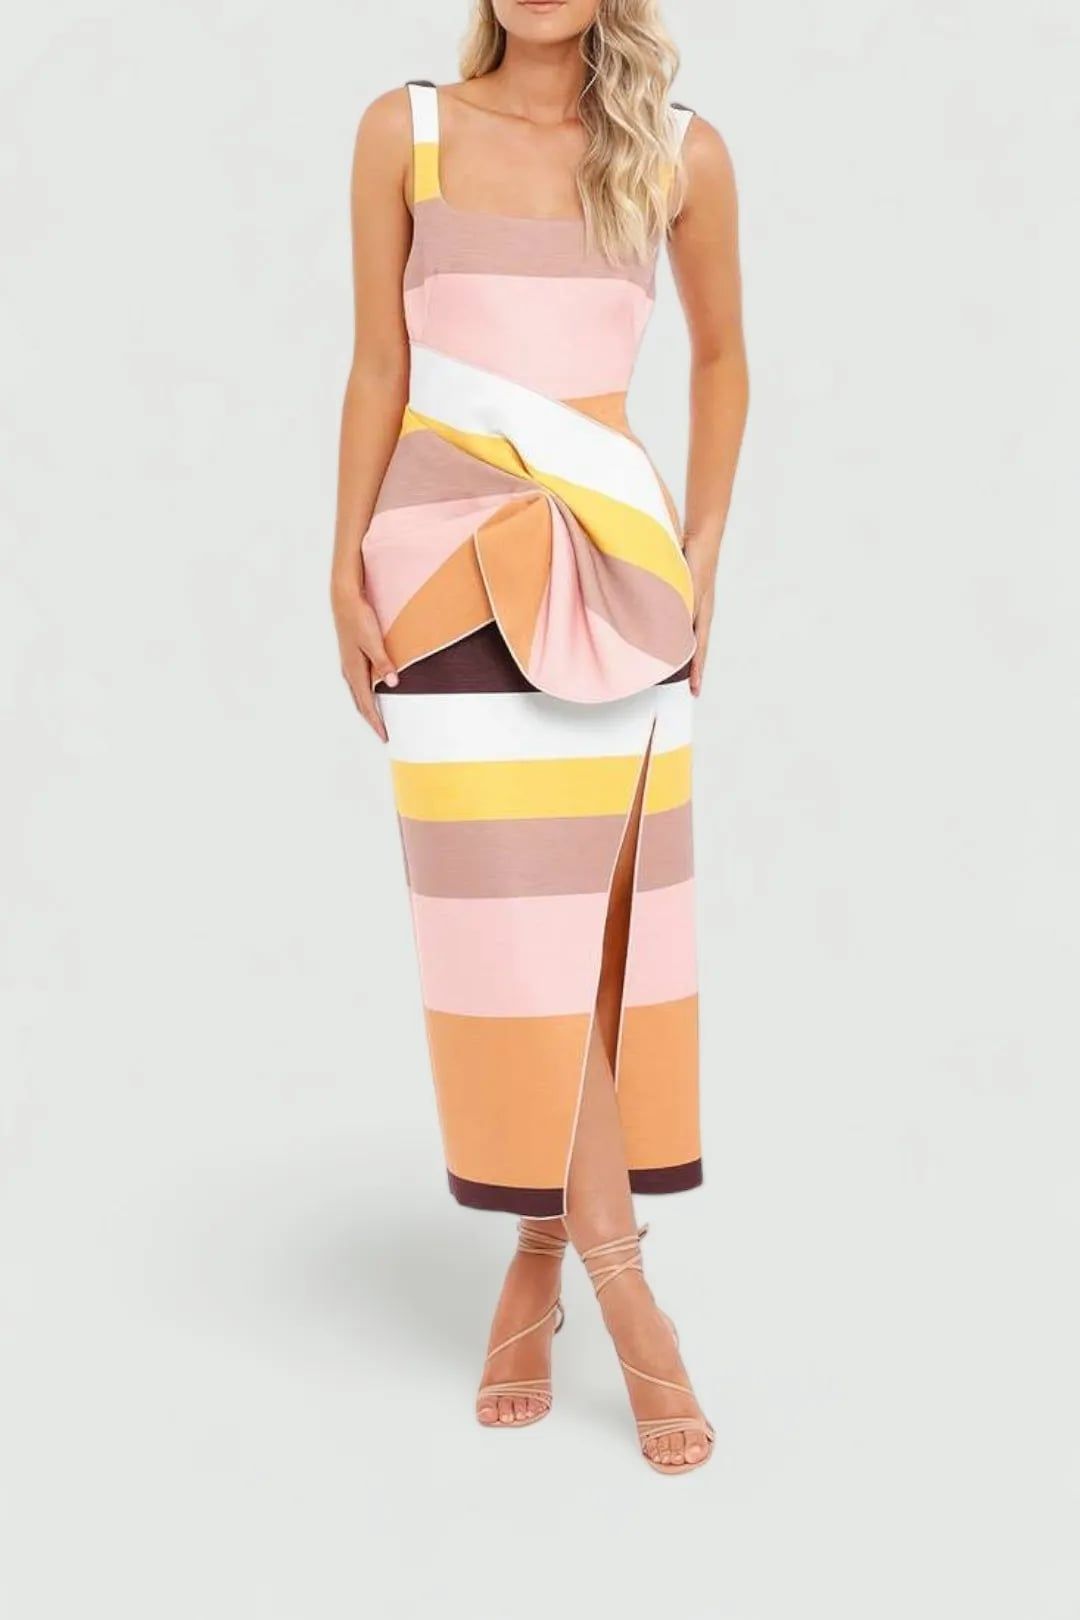 Hire Harper dress in rainbow stripe for summer events.